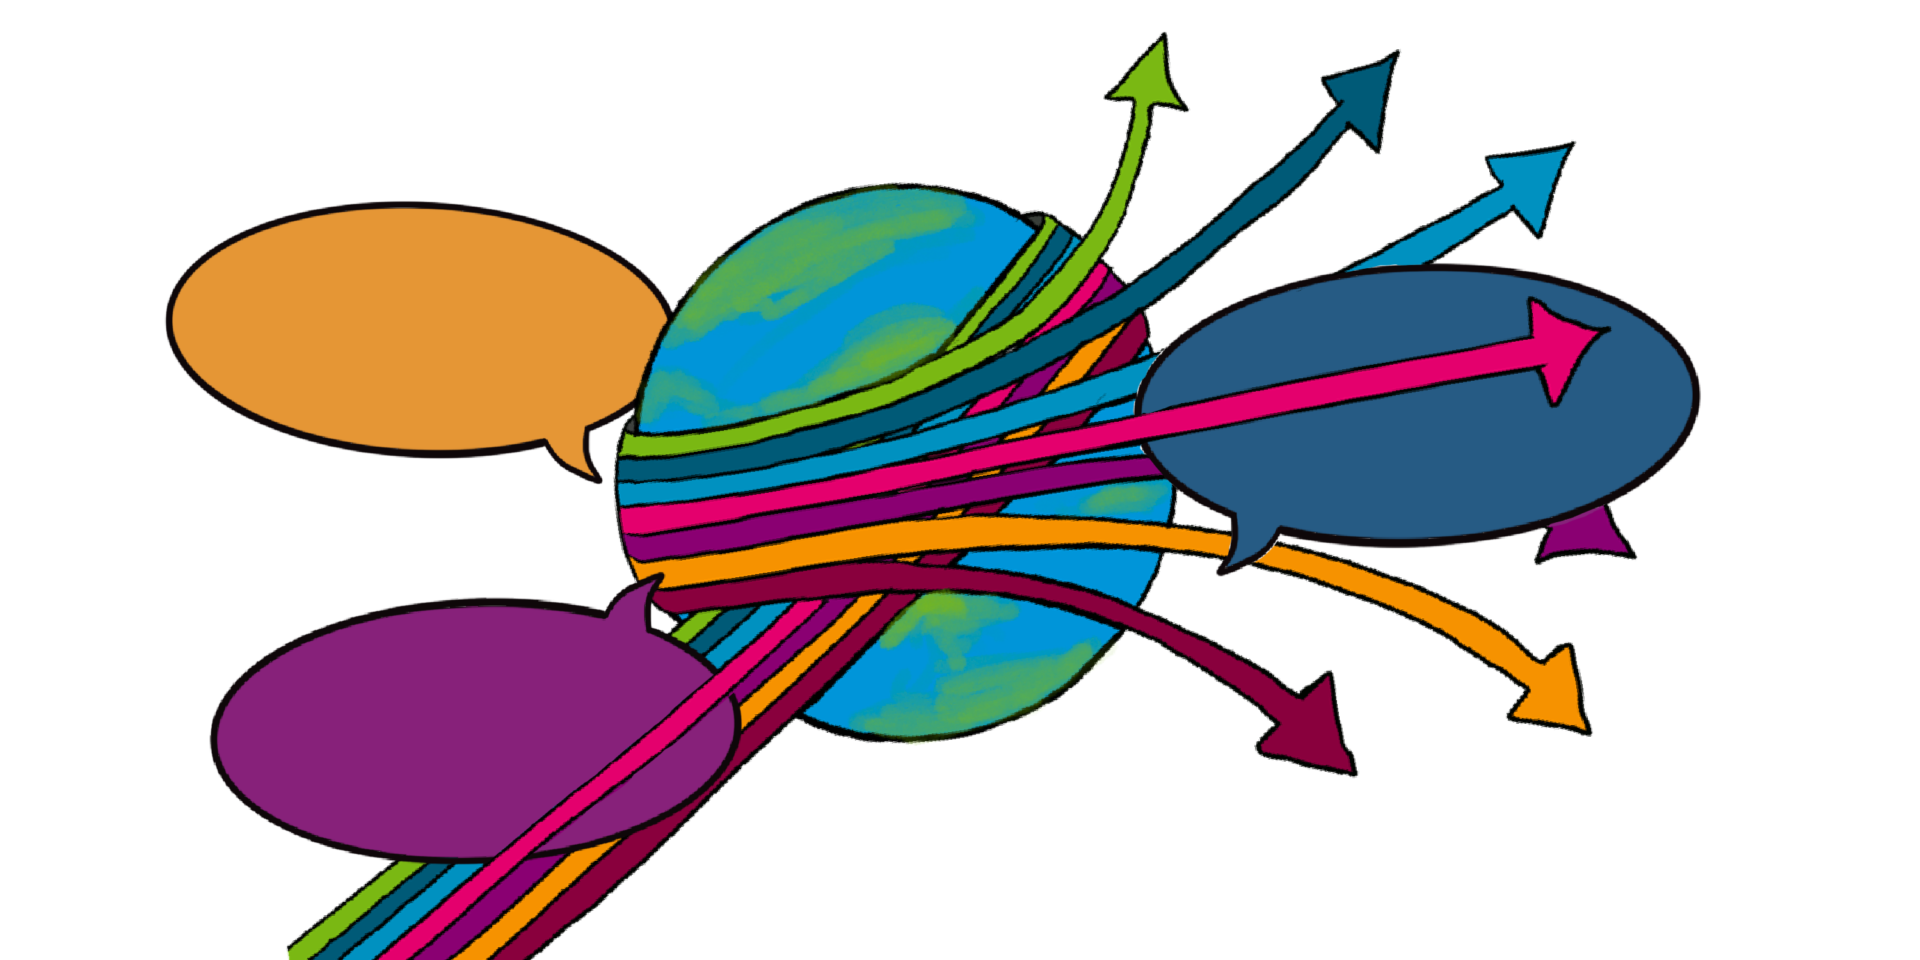 Illustration of a globe surrounded by arrows and speech bubbles in Business School colours.